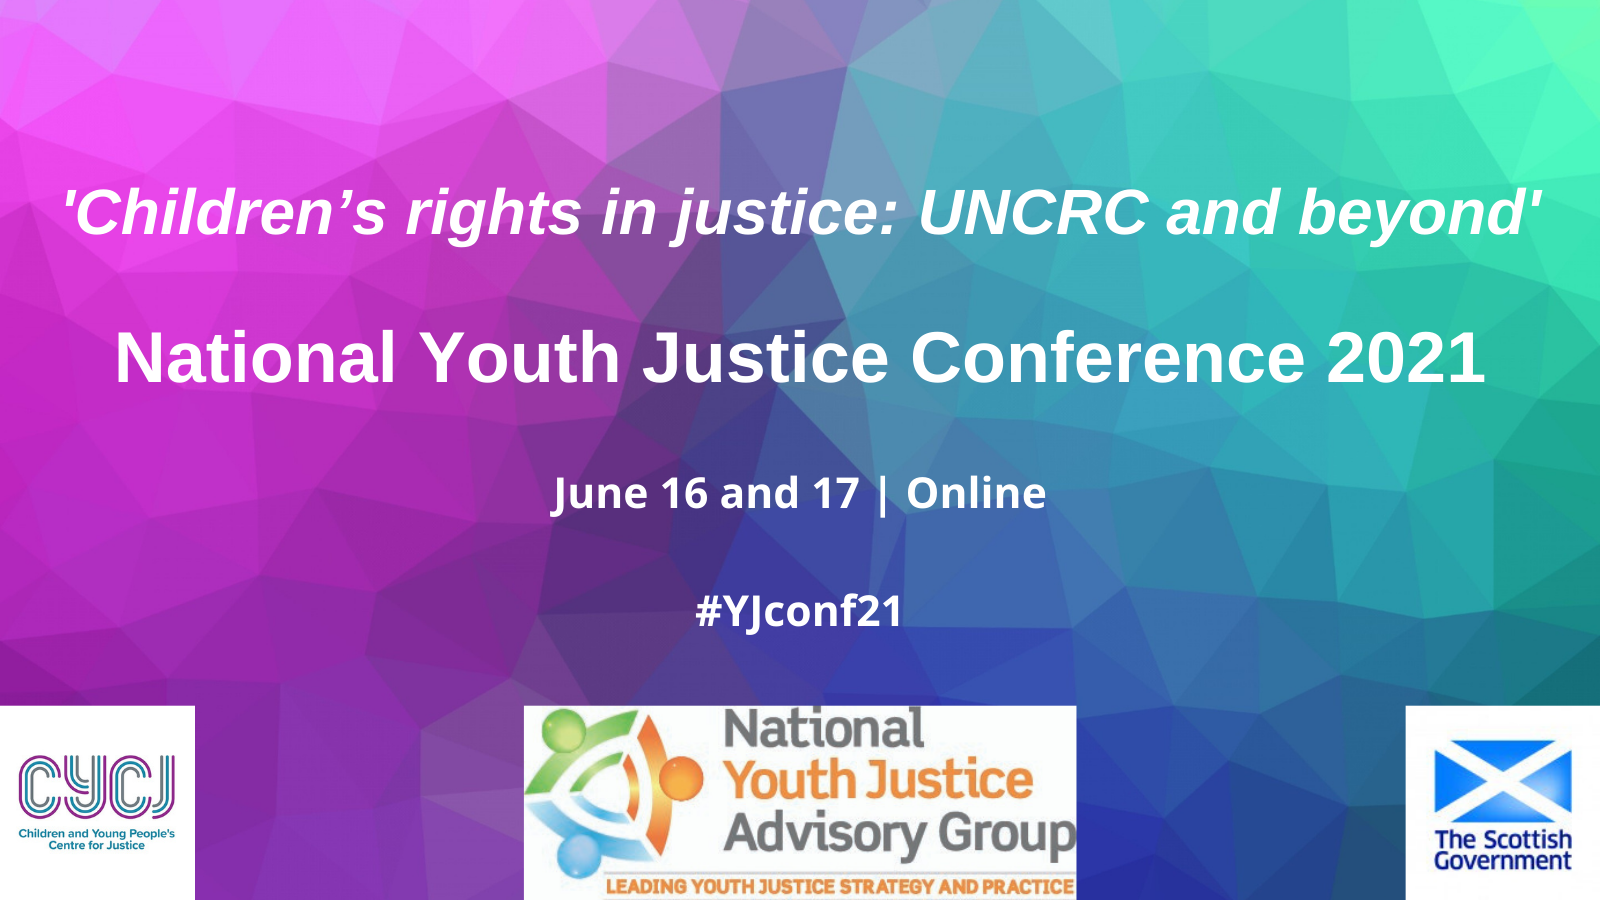 National Youth Justice Conference 2021 Children's and Young People's